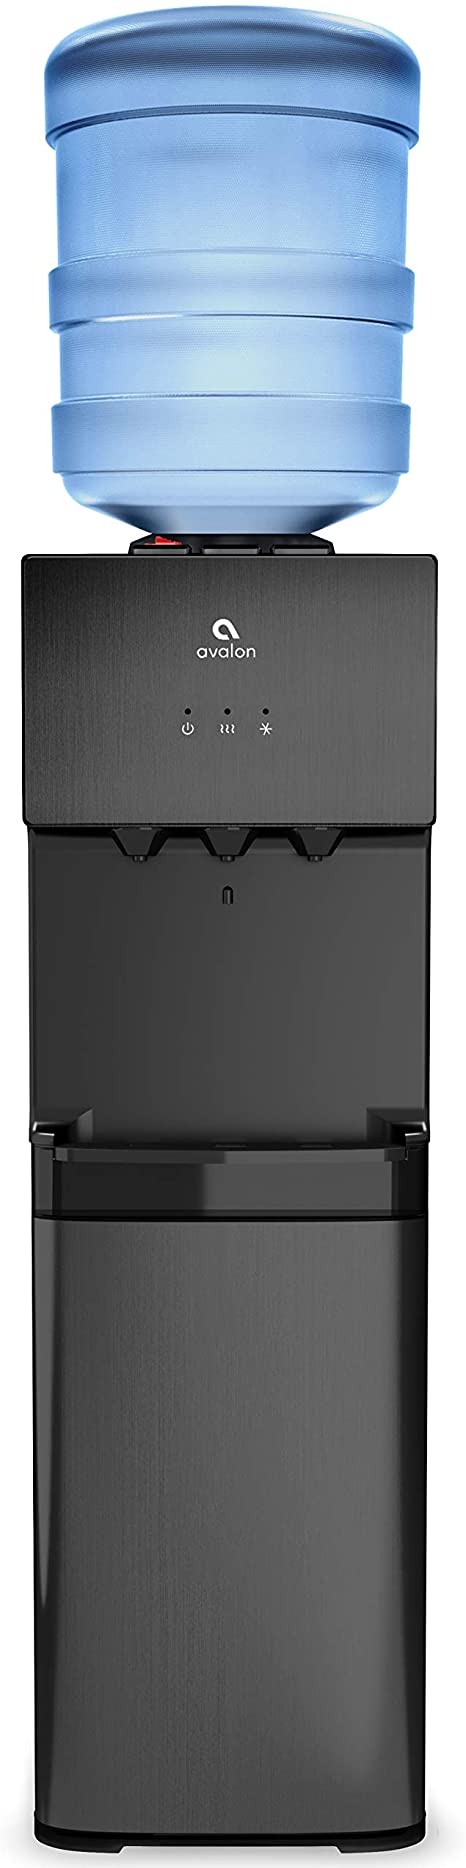 Avalon Top Loading Water Cooler Dispenser, 3 Tepmperature, Child Safety Lock, UL/Energy Star Approved- Black Stainless Steel